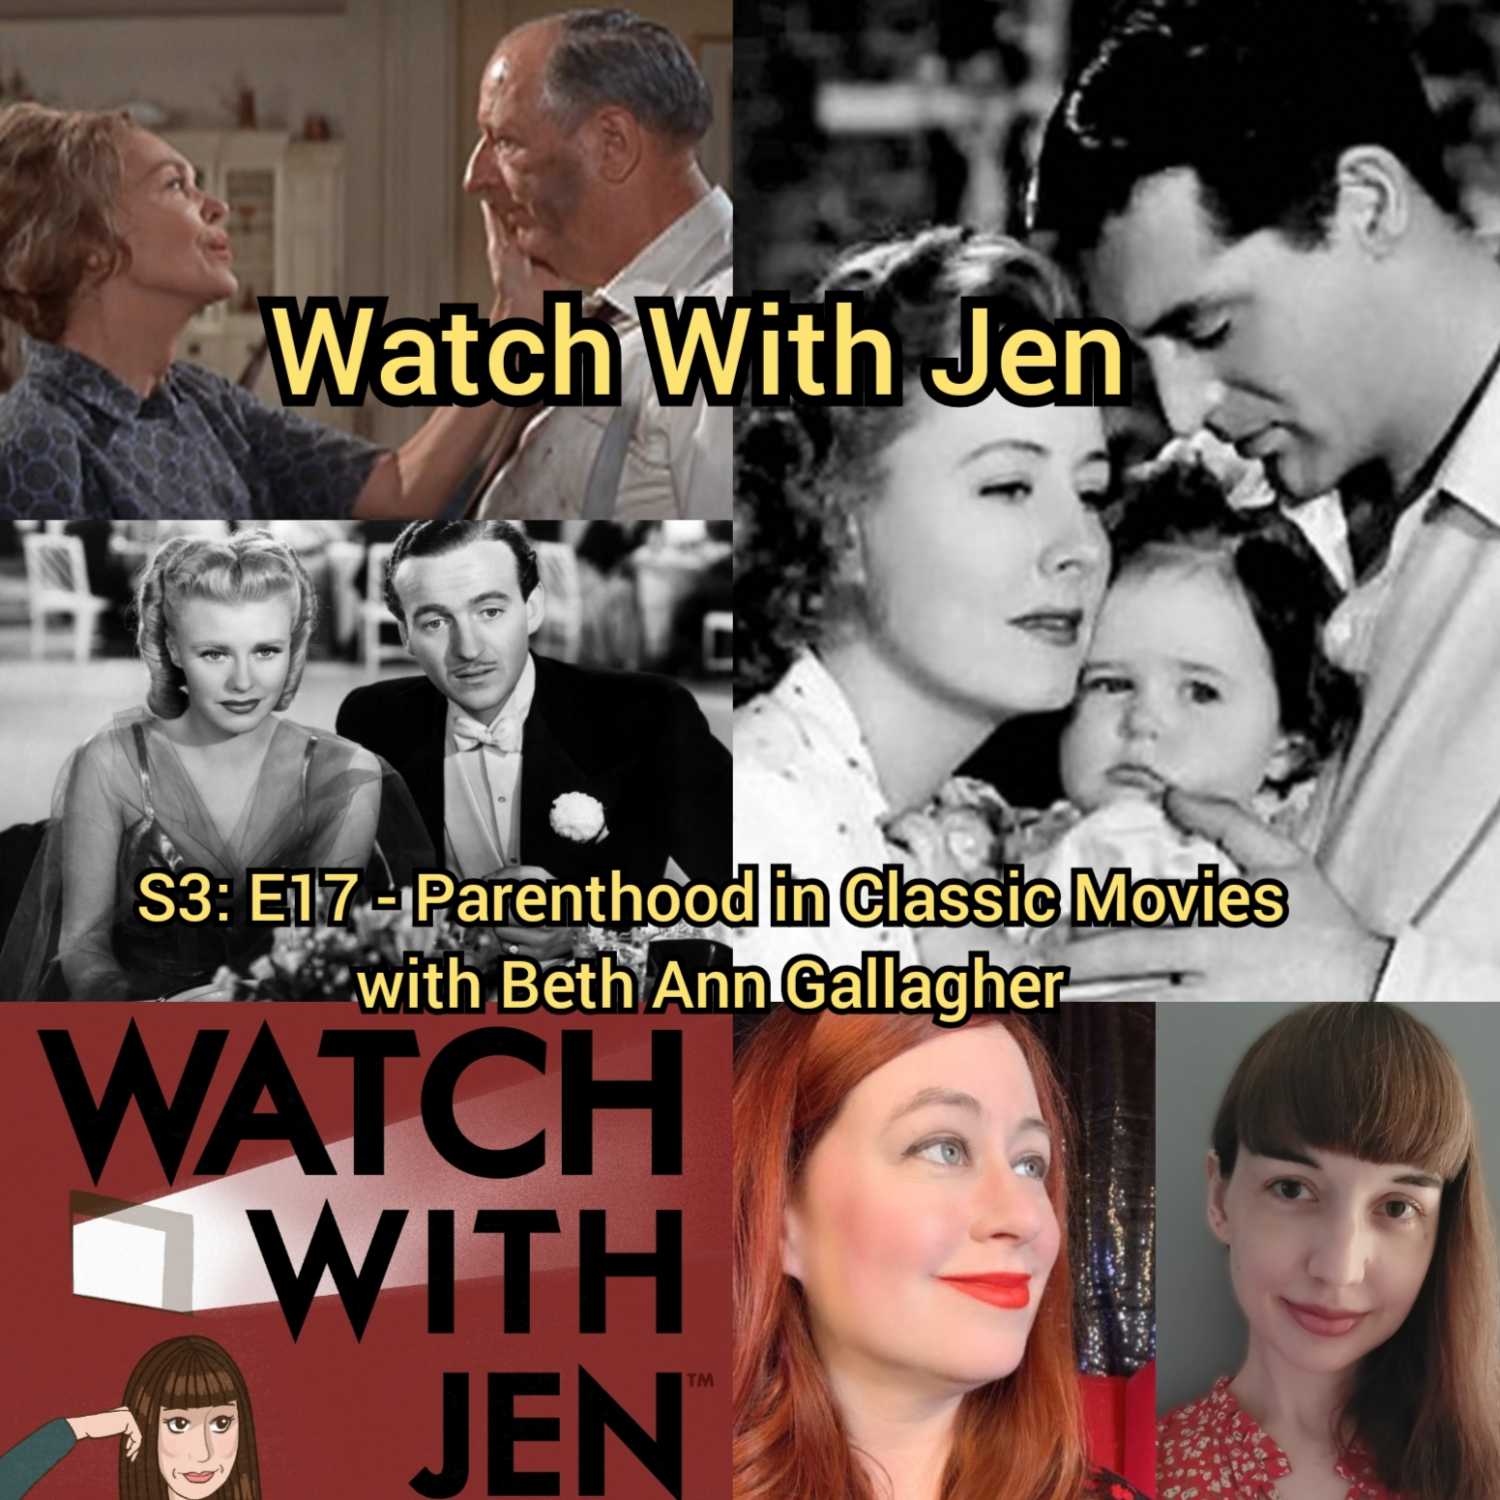 Watch With Jen - S3: E17 - Parenthood in Classic Movies with Beth Ann Gallagher